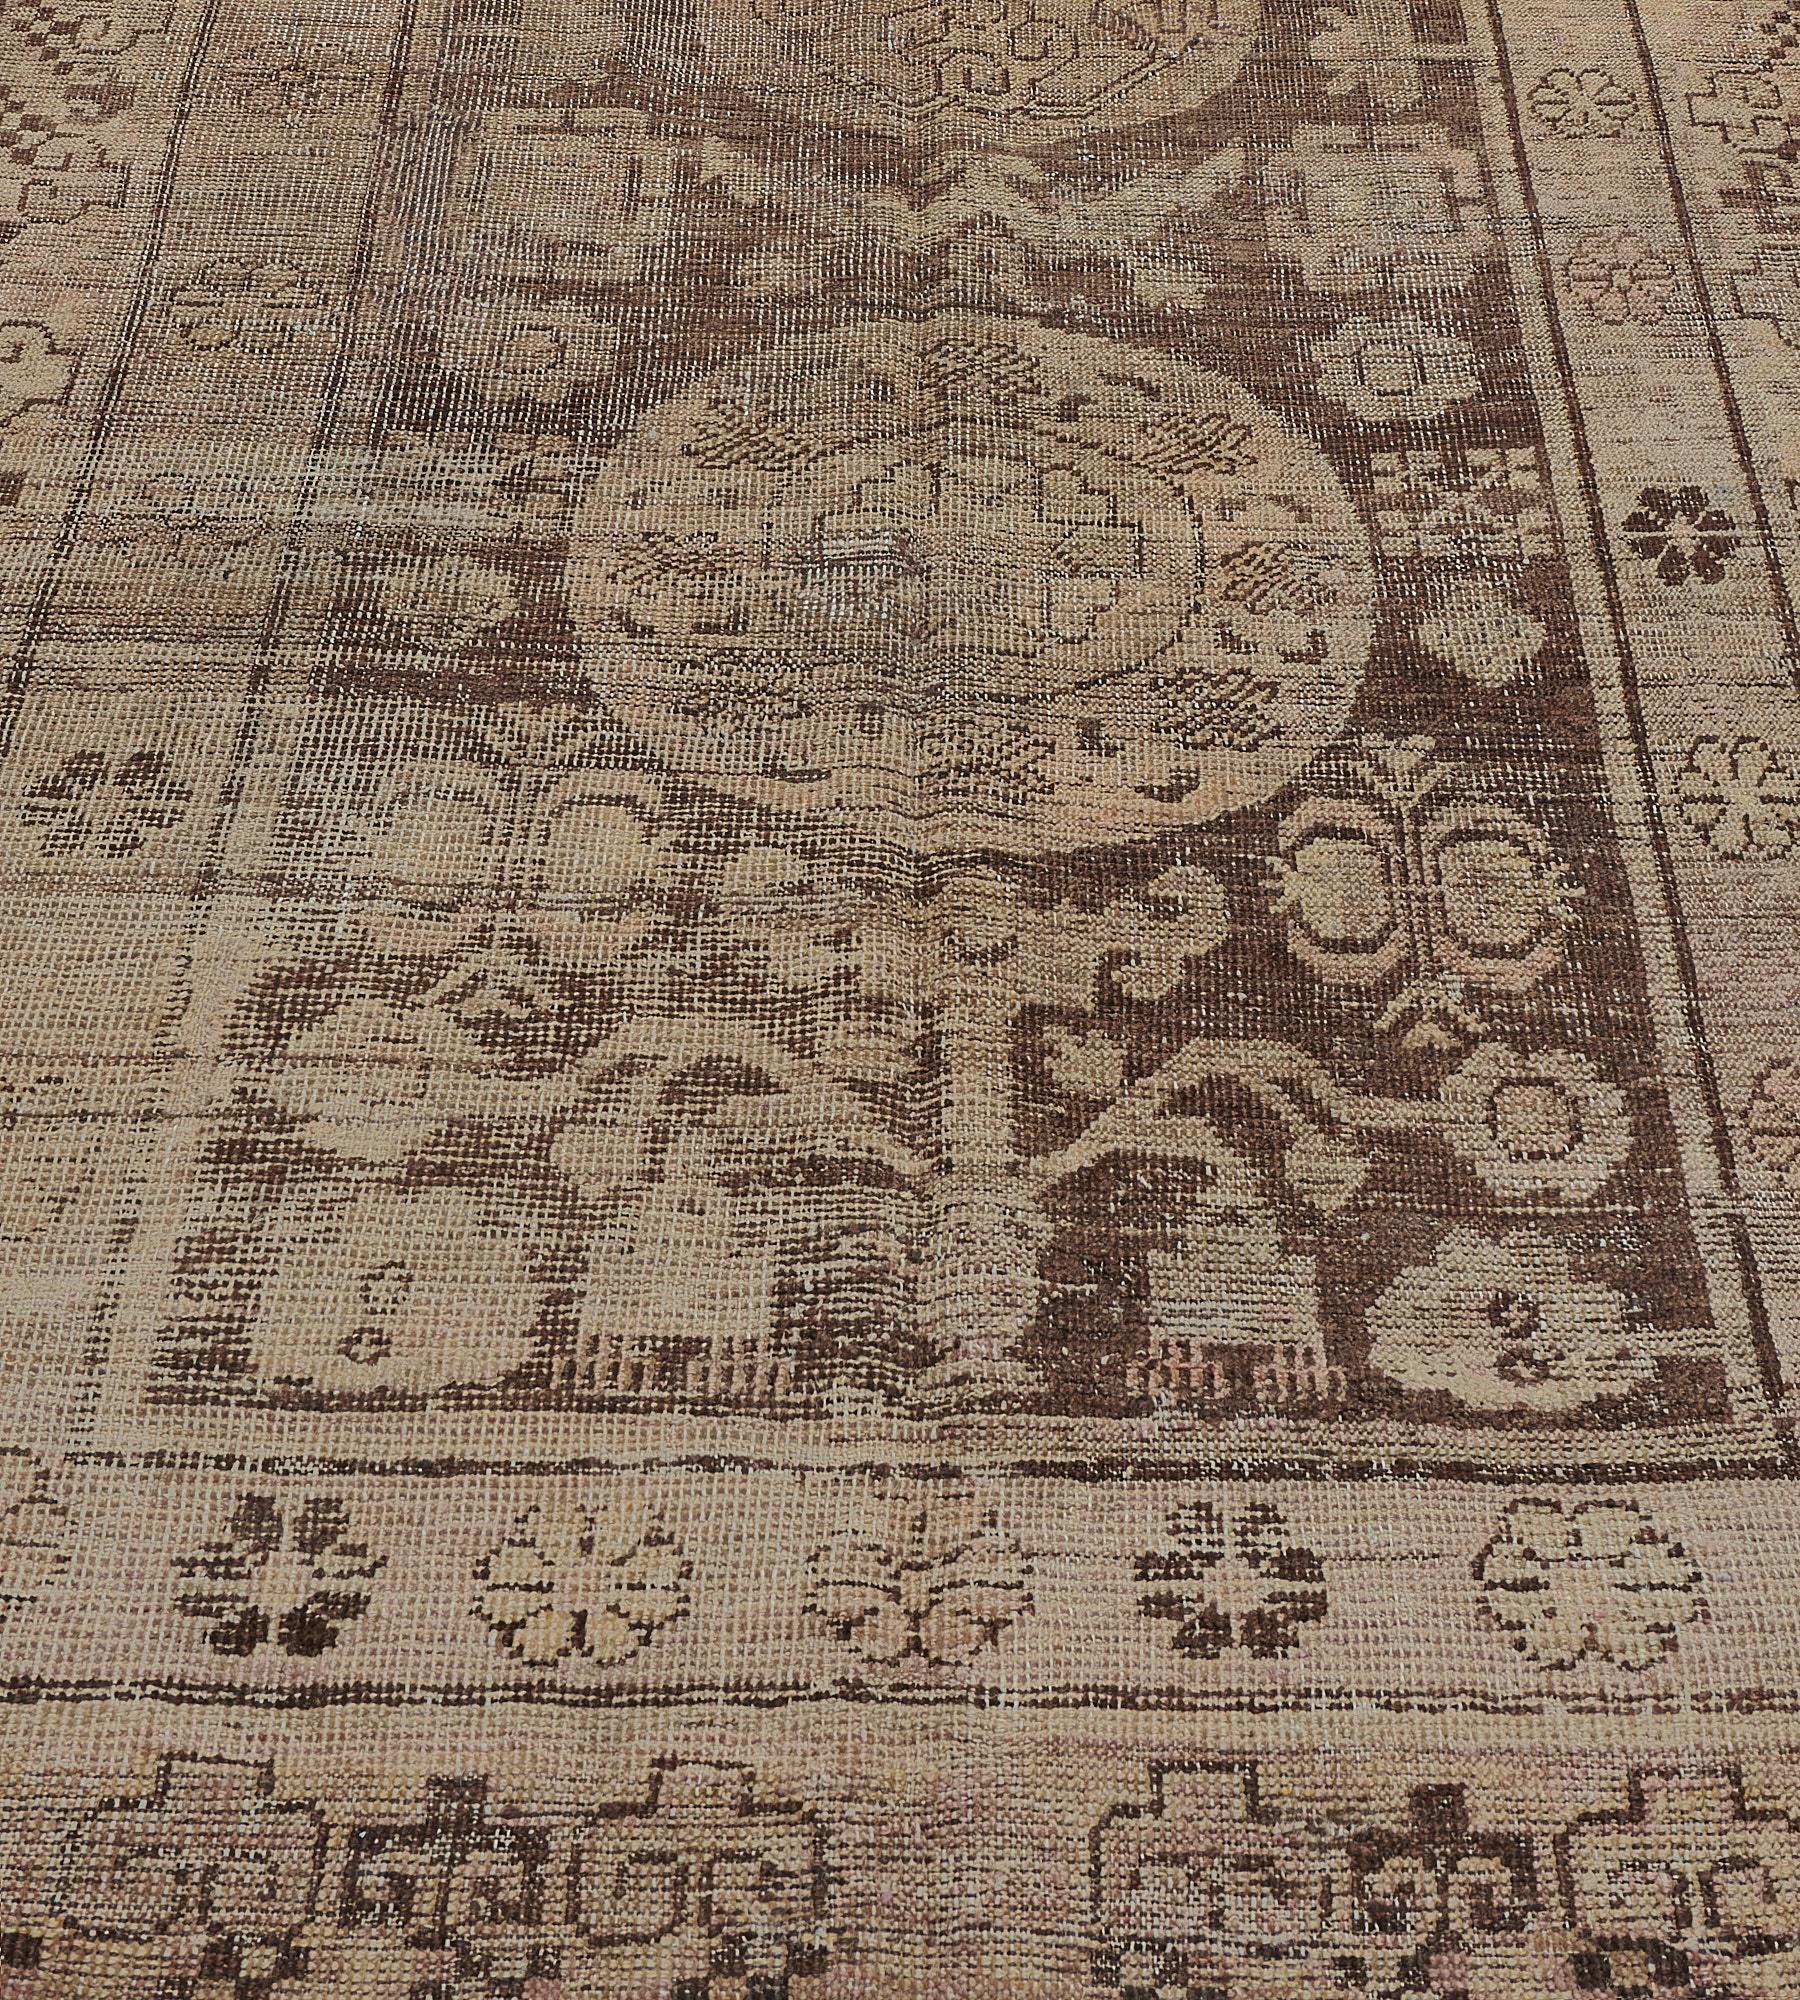 This antique, circa 1880, Khotan rug has a chocolate-brown field with a column of three sandy-yellow roundels containing a central lozenge surrounded by a band of floral motifs and an angular palmette vine in the central lozenge, surrounded by